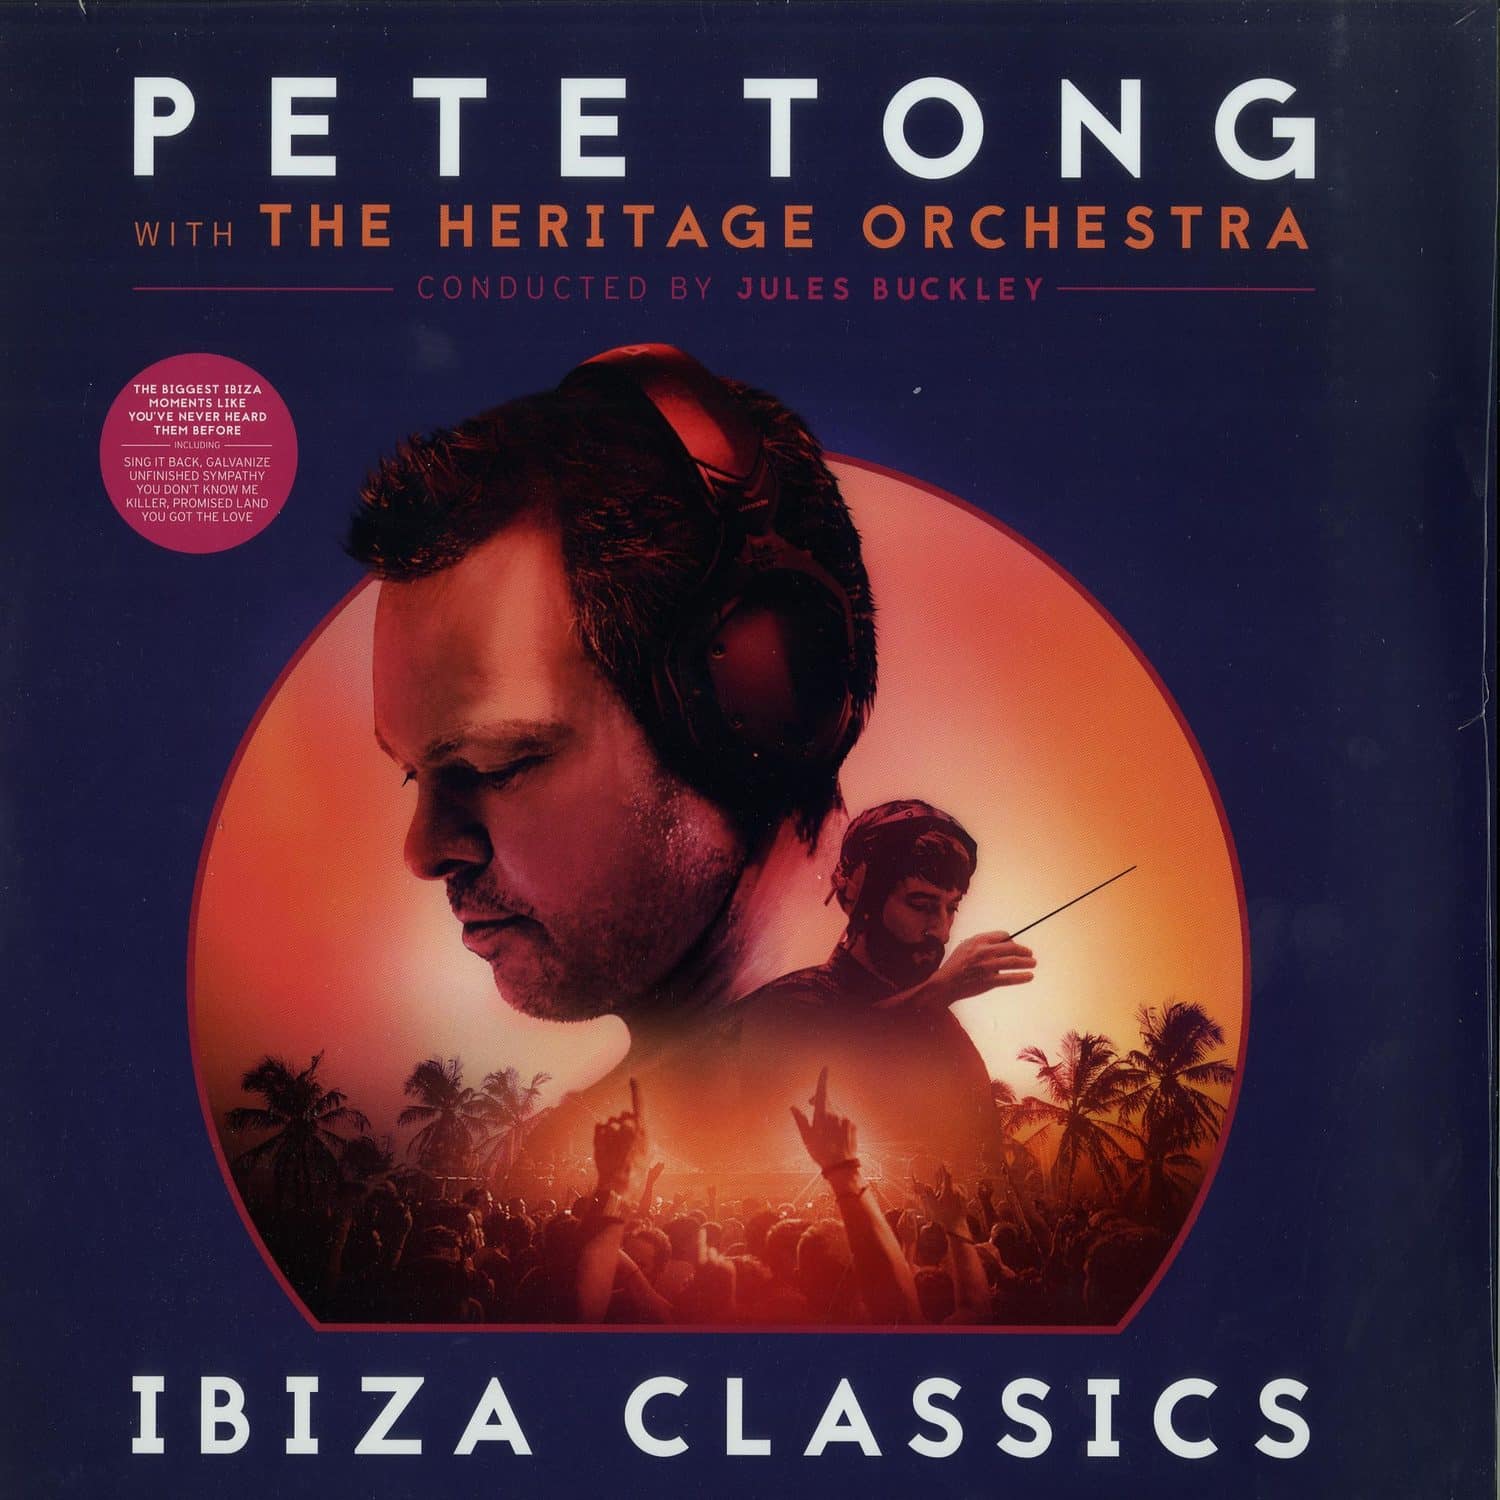 Pete Tong with The Heritage Orchestra - IBIZA CLASSICS 